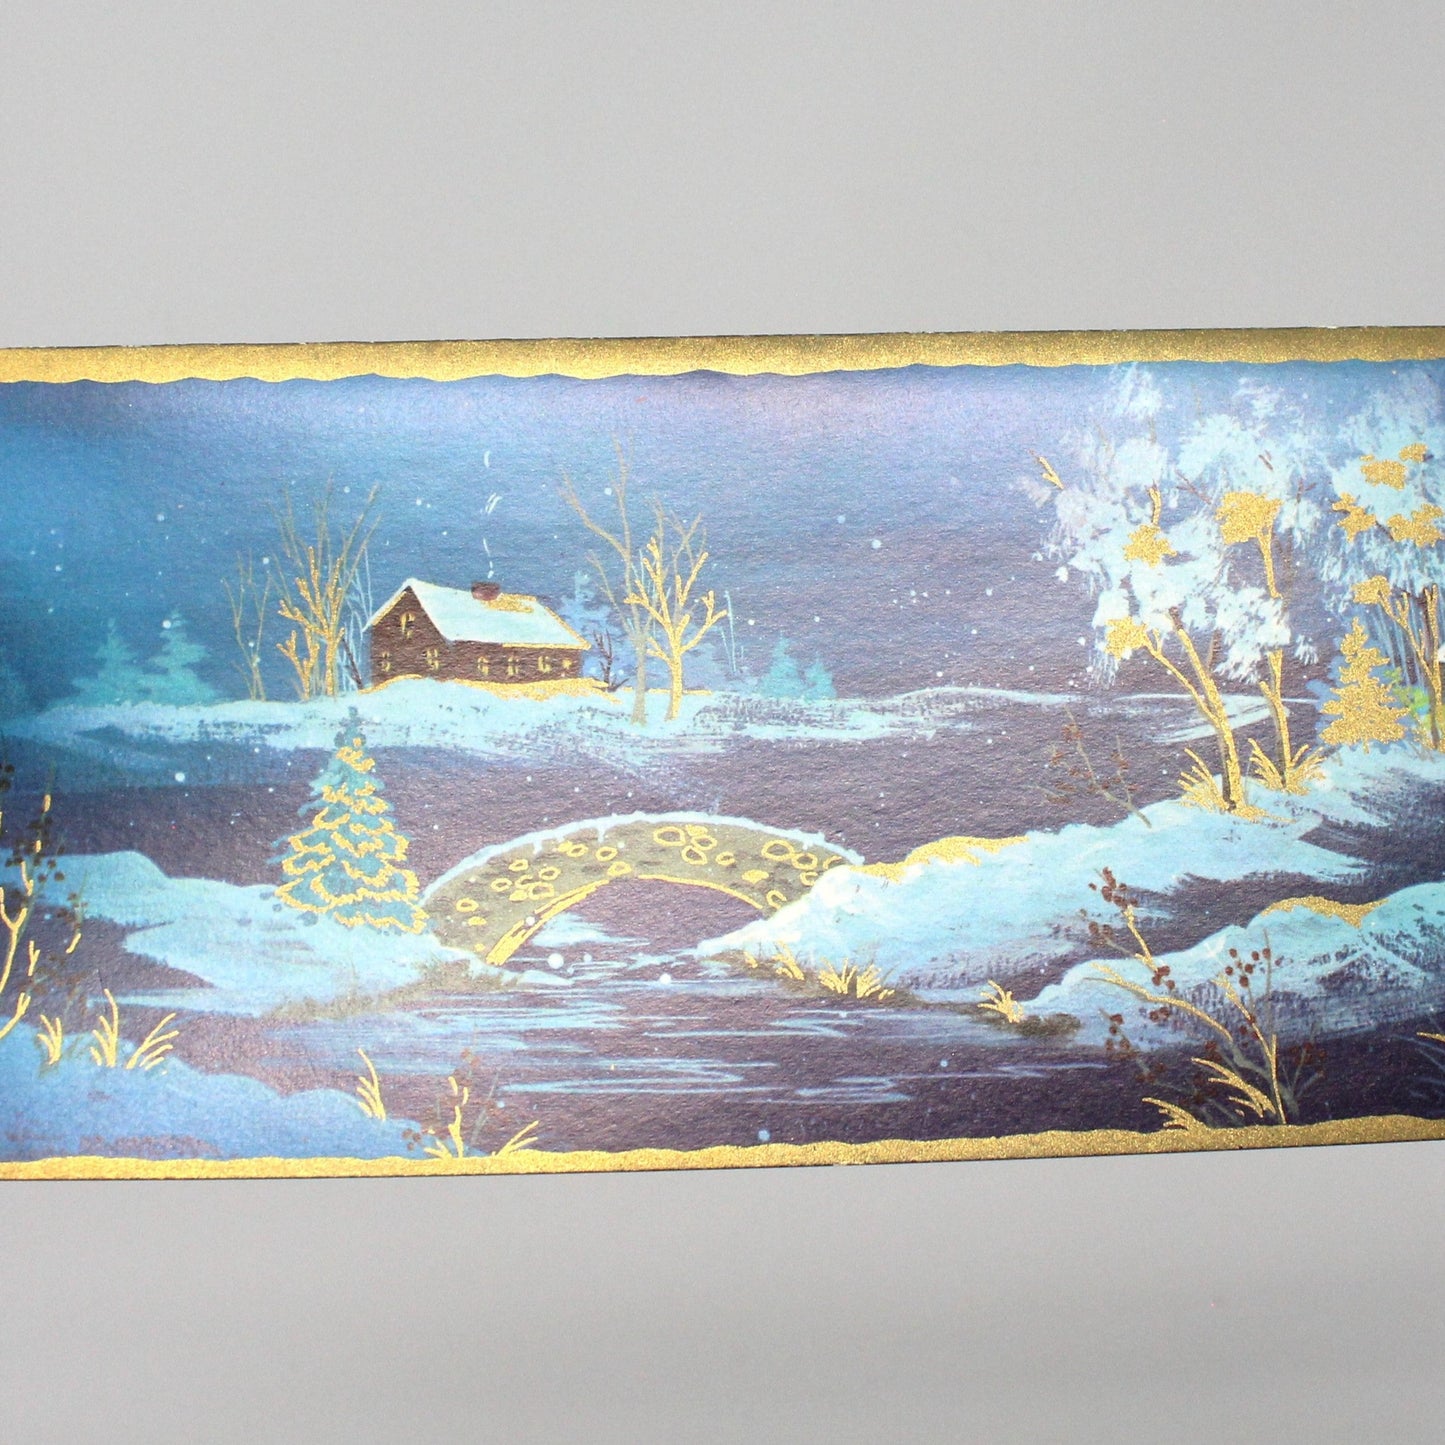 Greeting Card / Christmas Card, Art Design by Brook, Cabin in the Woods Snowy Christmas Scene, Original Vintage